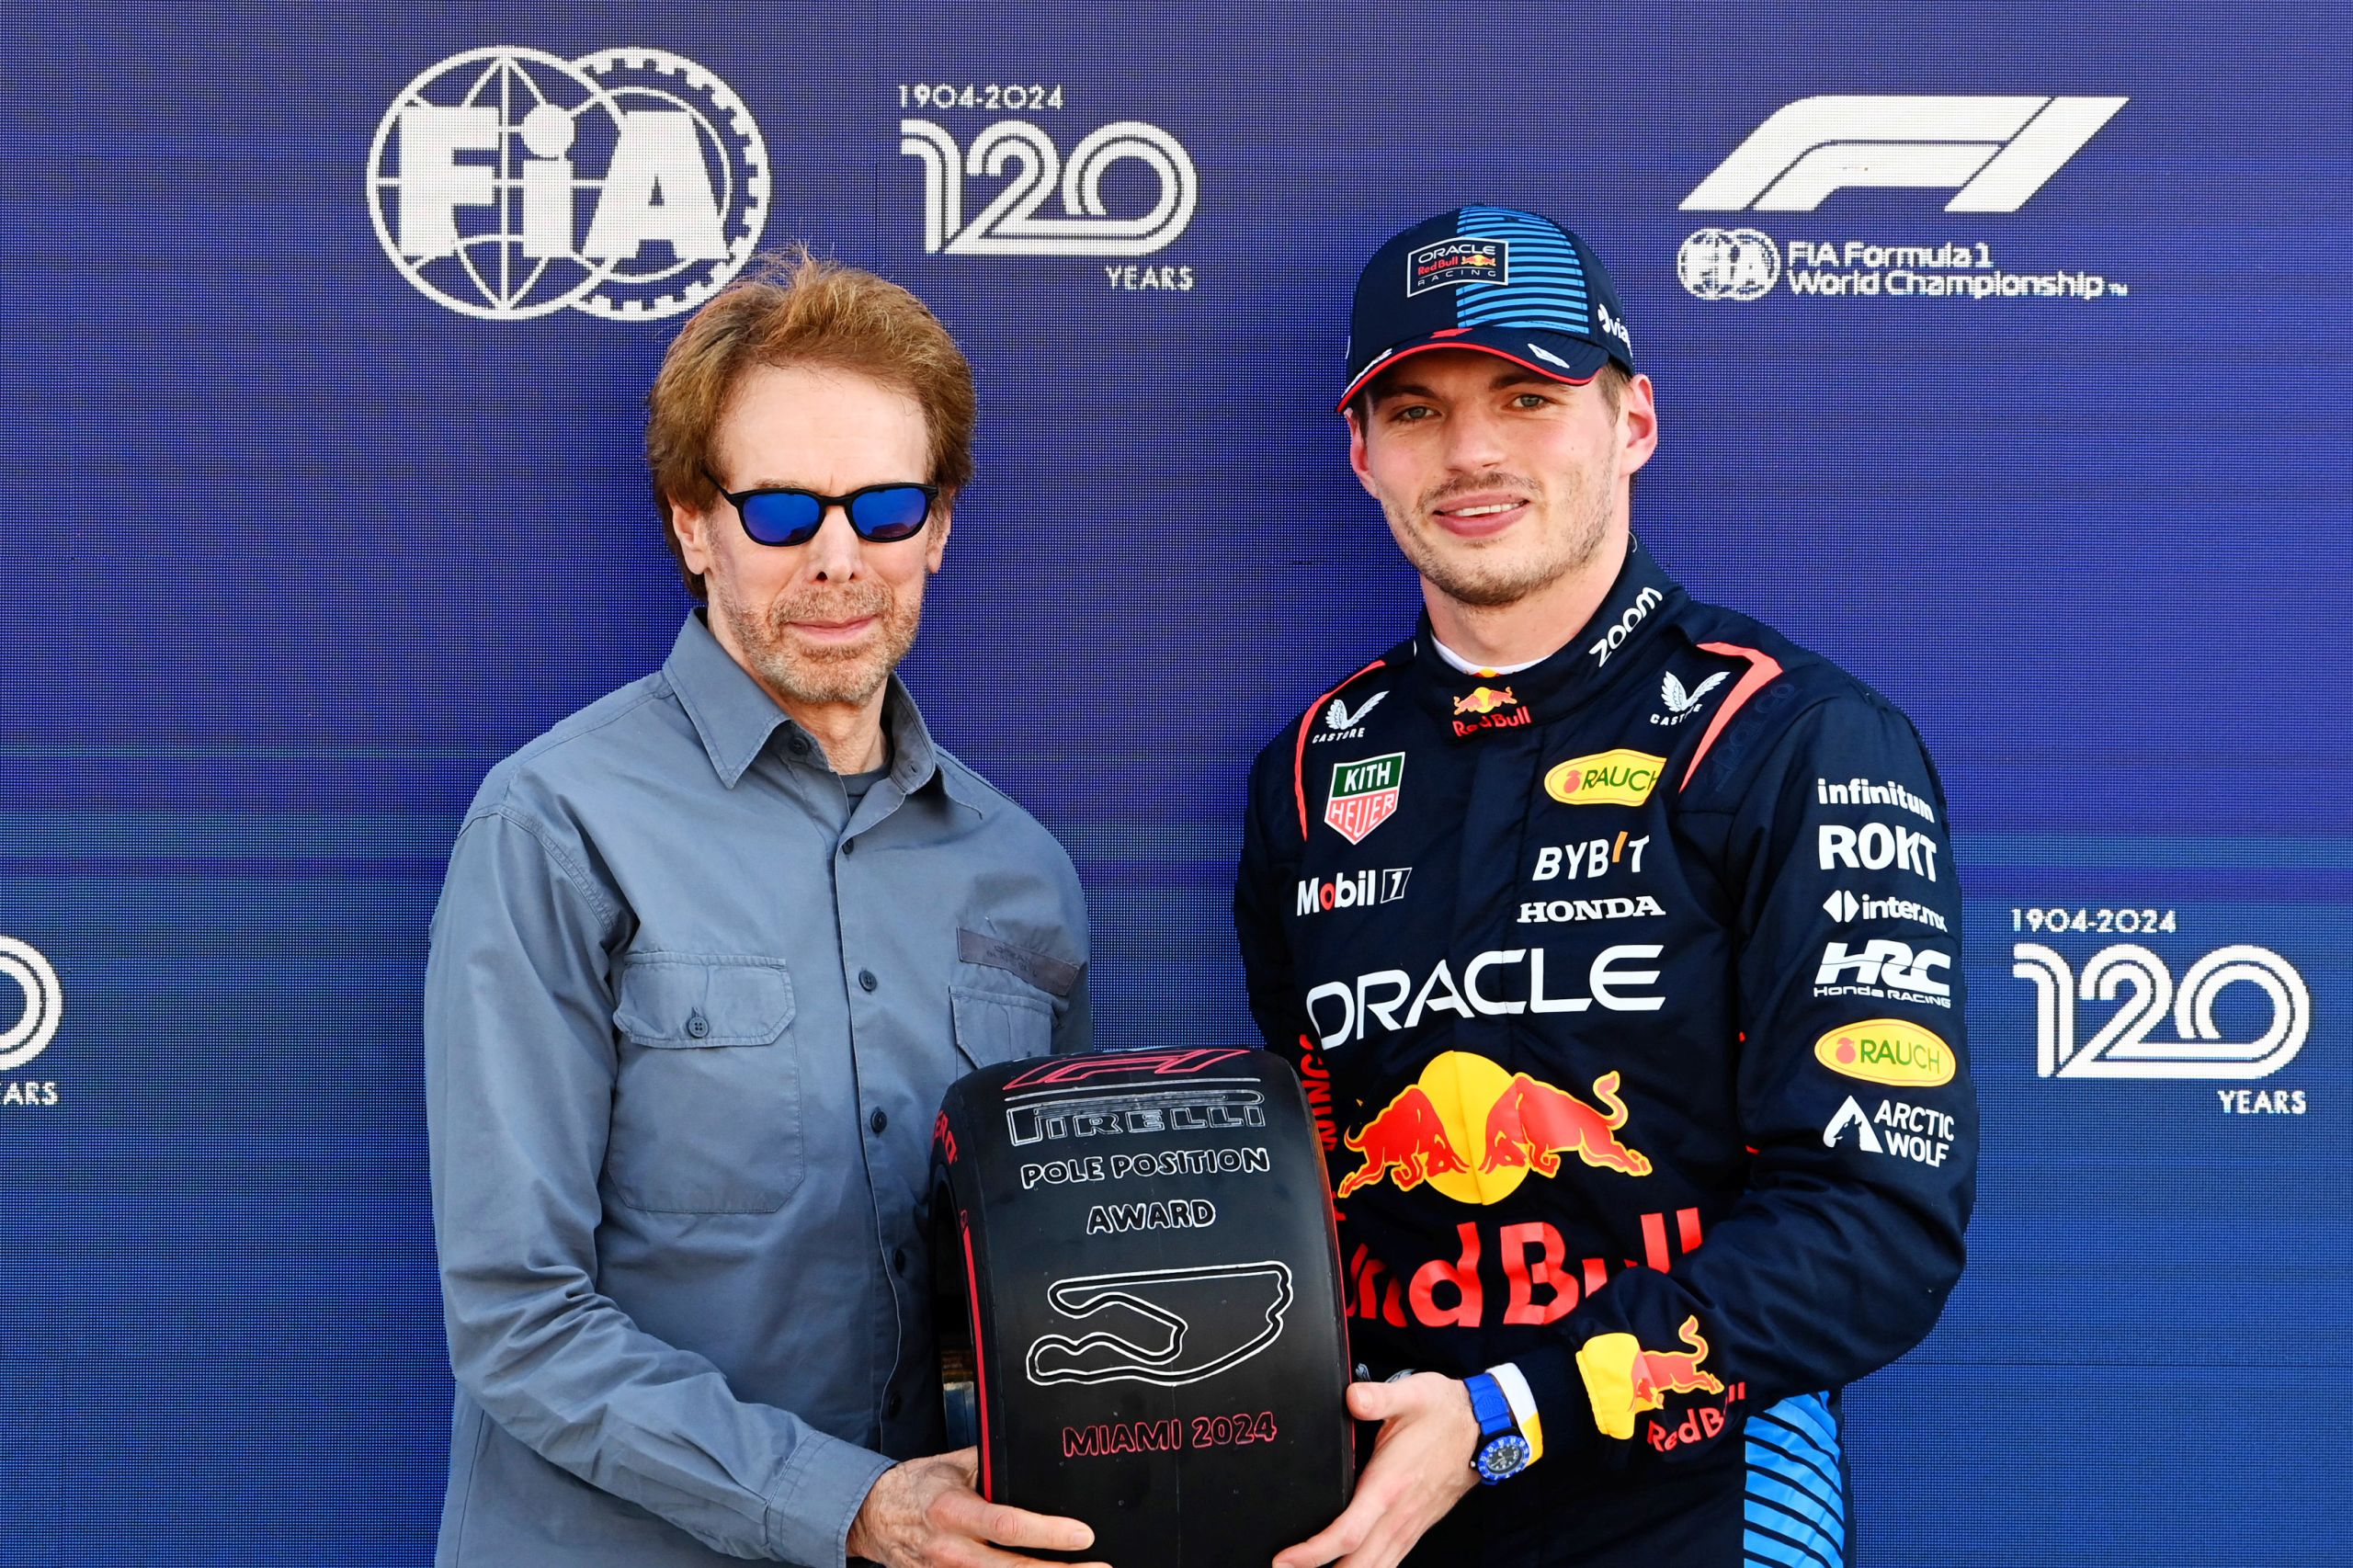 MIAMI INTERNATIONAL AUTODROME, UNITED STATES OF AMERICA - MAY 04: Pole man Max Verstappen, Red Bull Racing, receives his Pirelli Pole Position Award from Producer Jerry Bruckheimer during the Miami GP at Miami International Autodrome on Saturday May 04, 2024 in Miami, United States of America. (Photo by Mark Sutton / LAT Images)